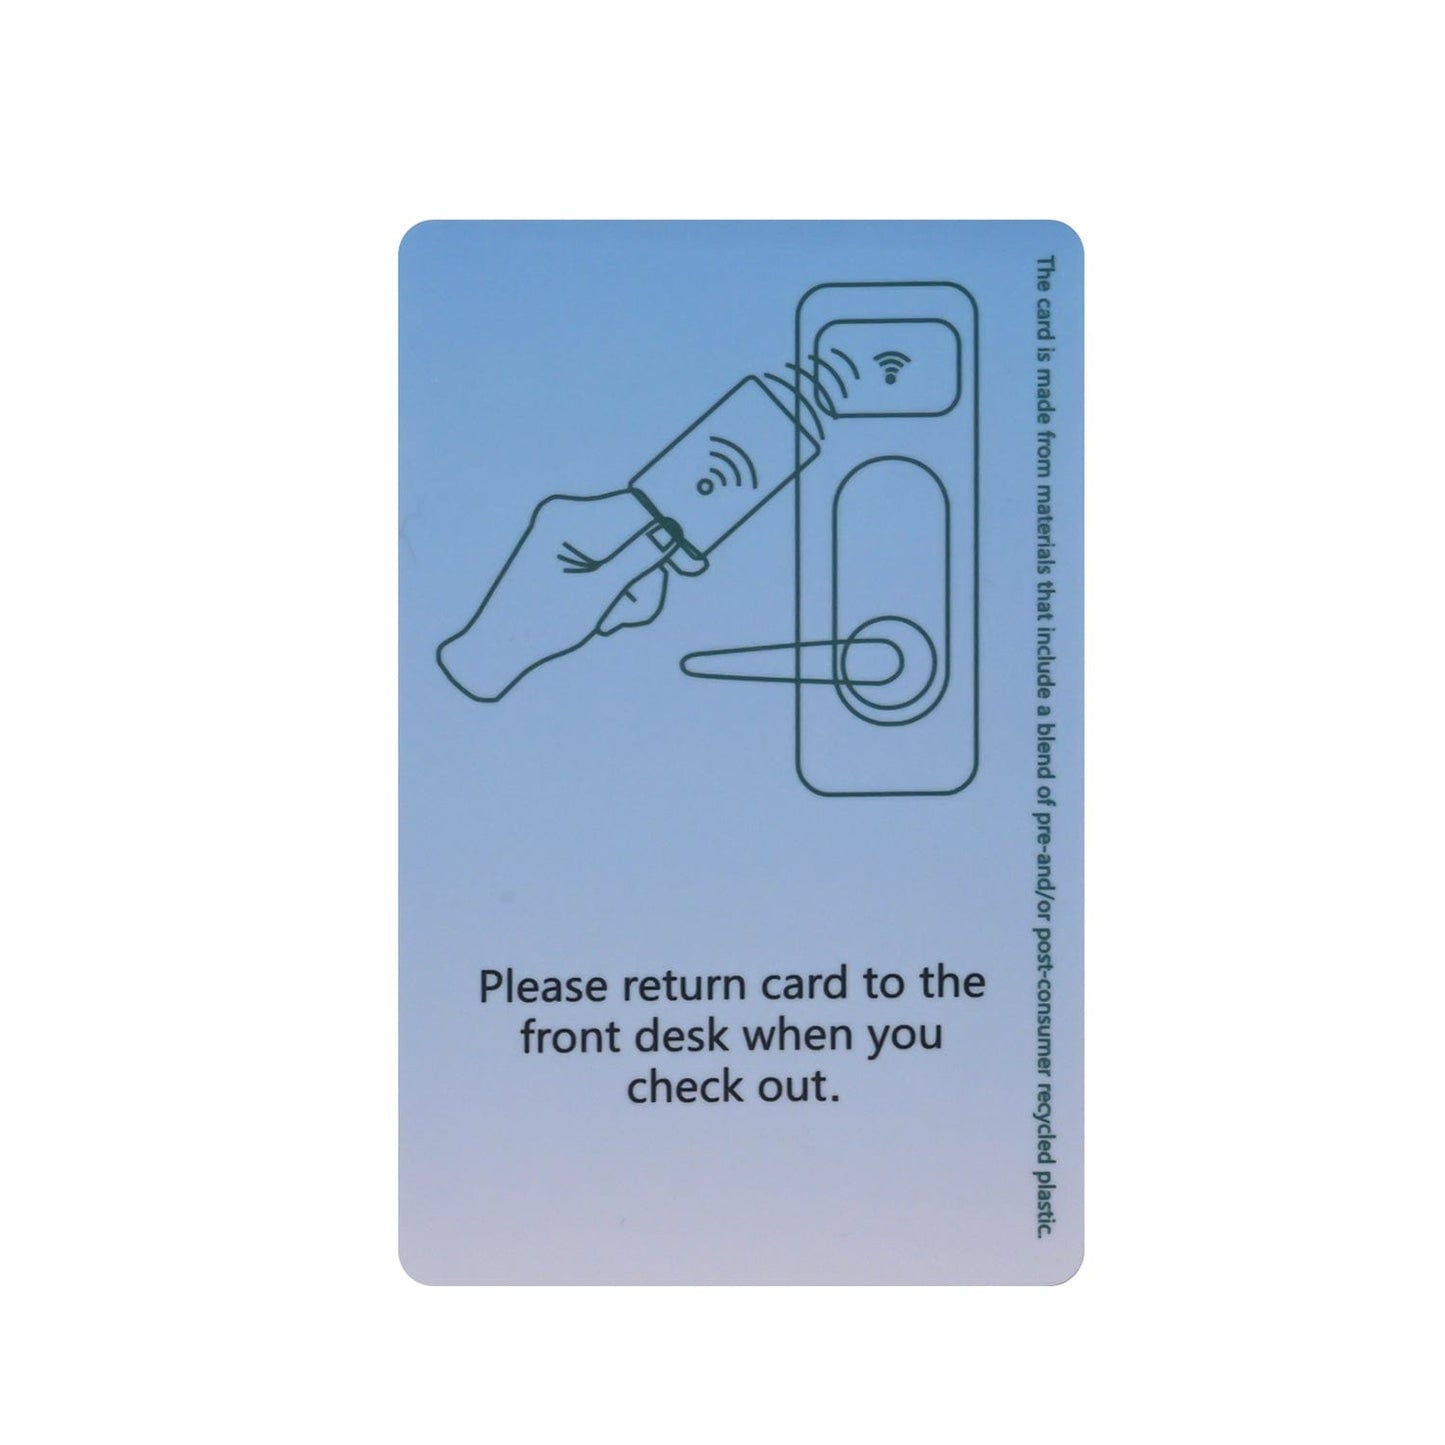 Assa Abloy Compatible Wyndham RFID Key Cards (Sold in boxes of 200)